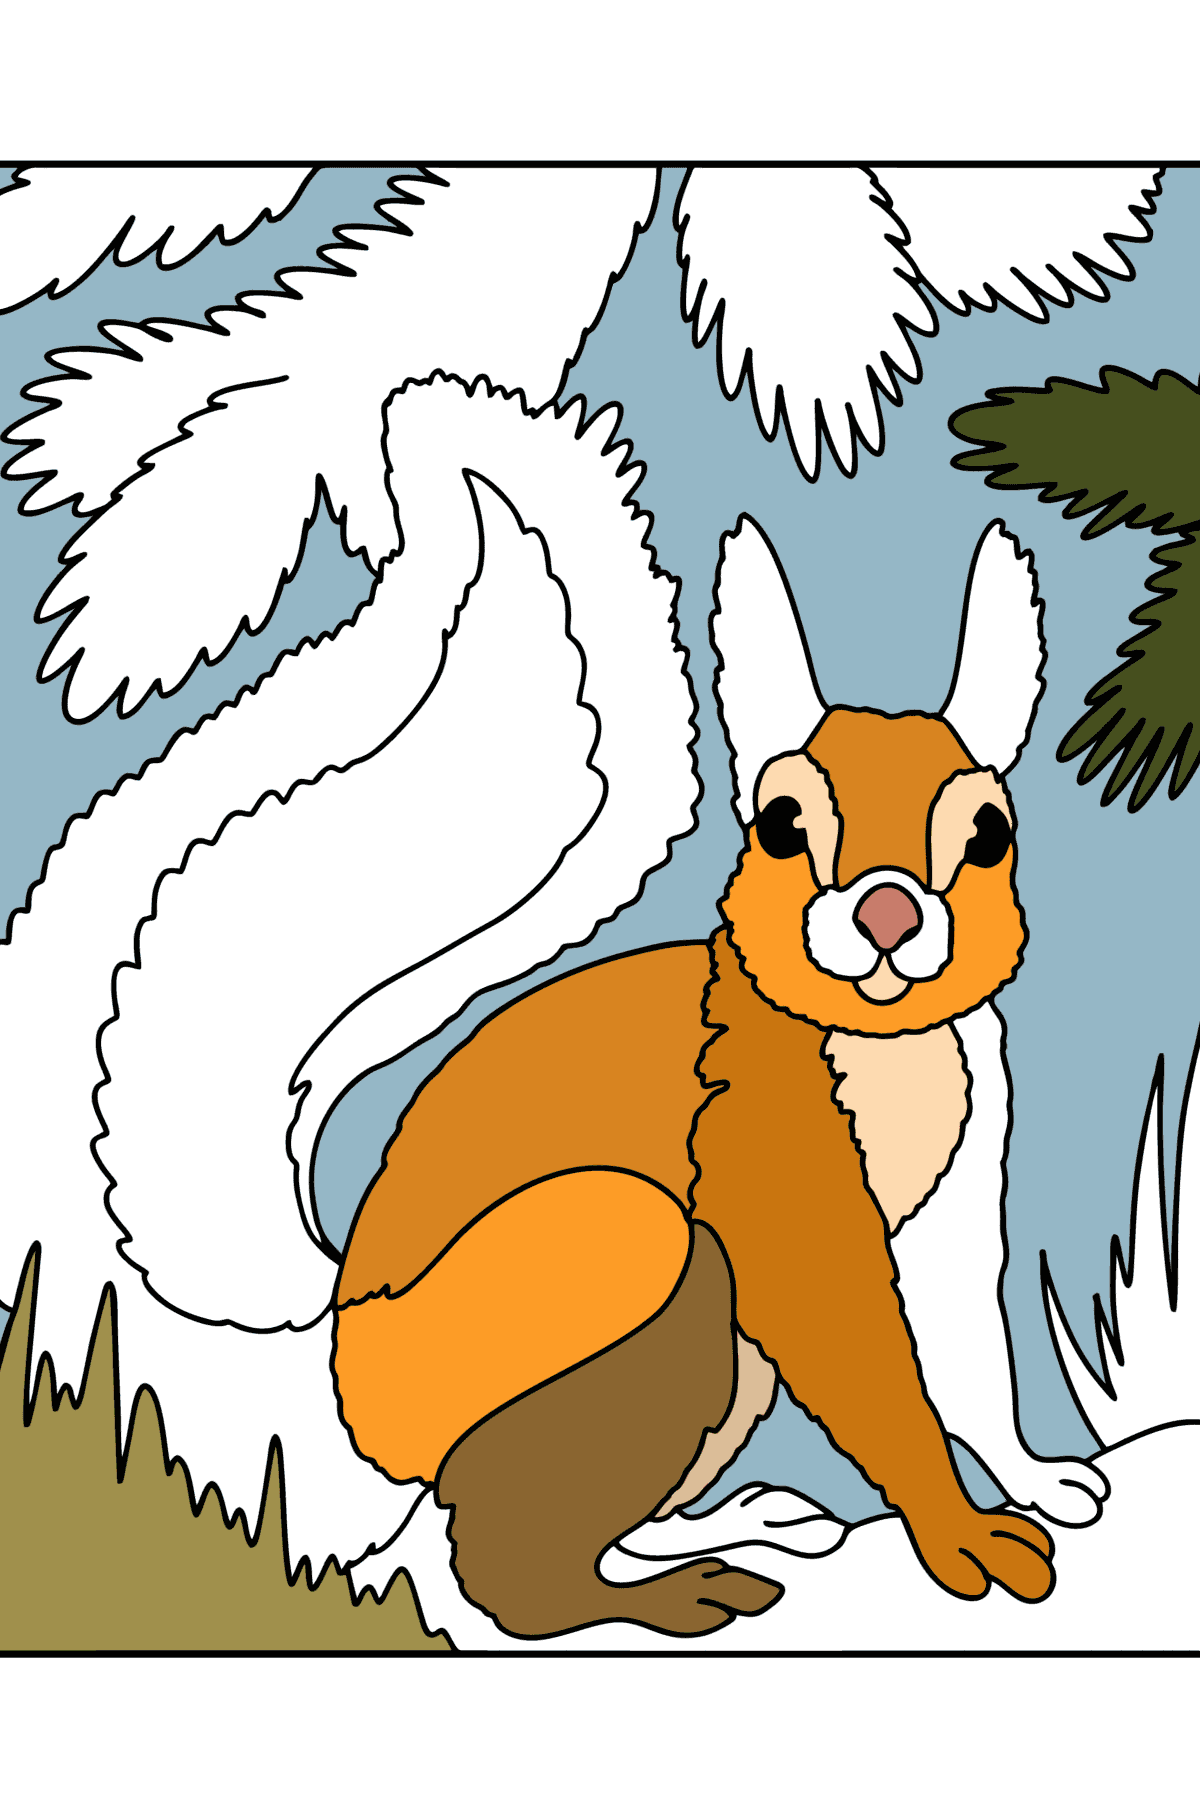 Squirrel сoloring page - Coloring Pages for Kids